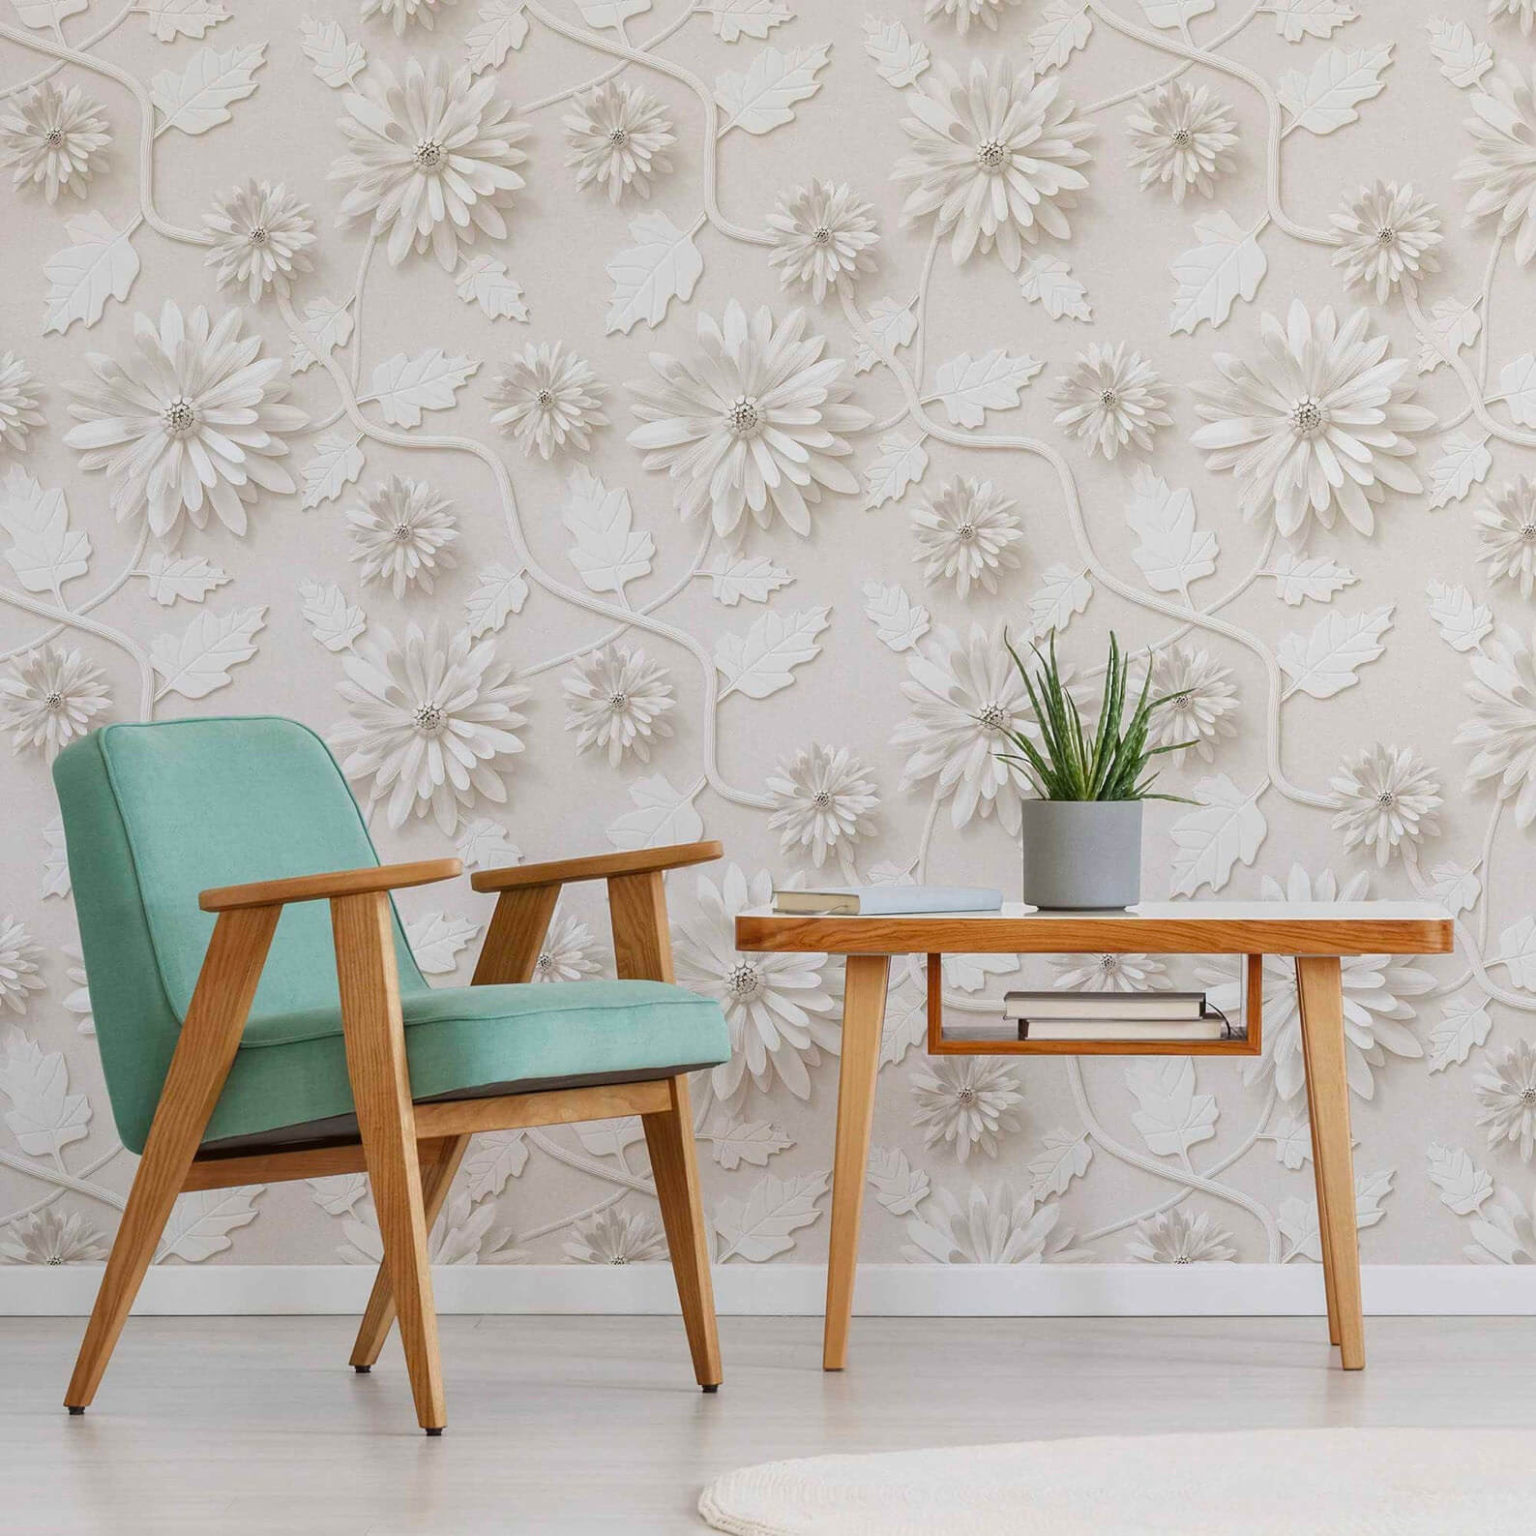 Where To Buy Removable Wallpaper - Removable Wallpaper Etsy